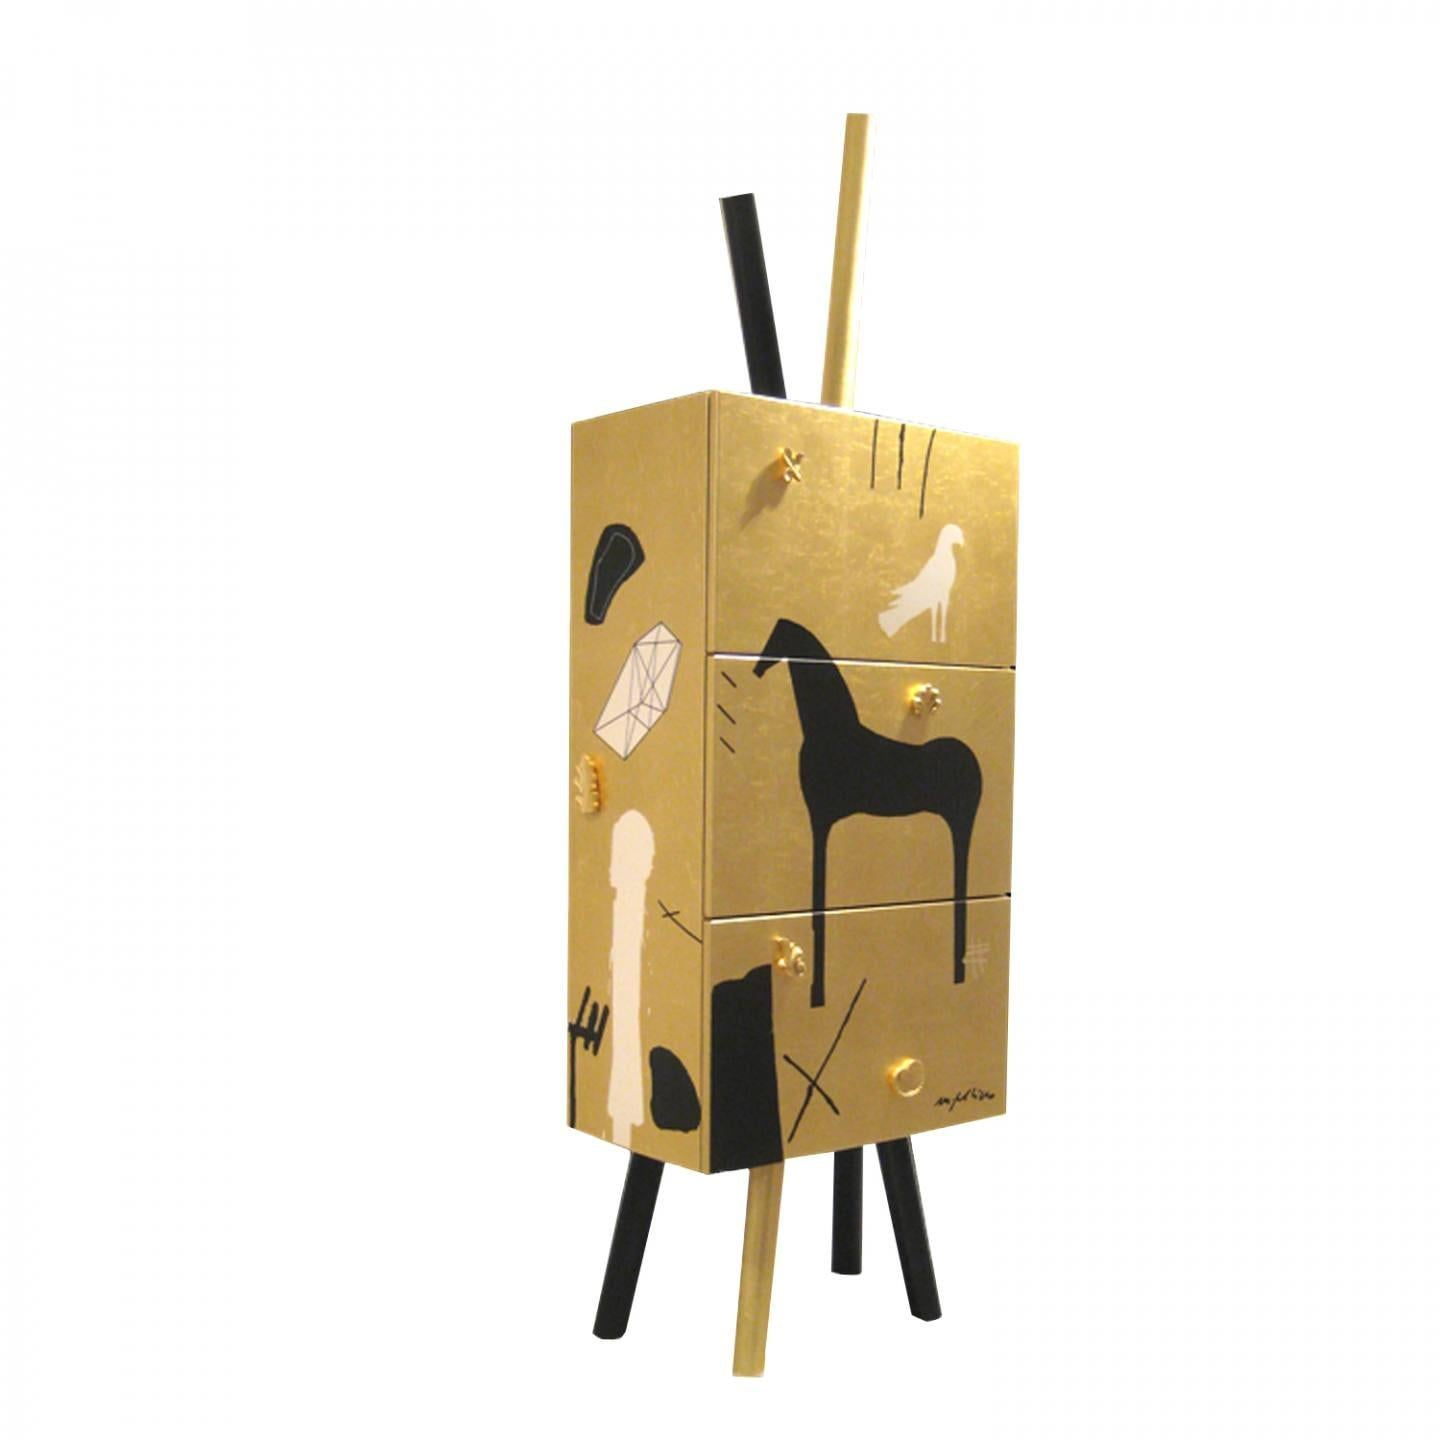 Modern Mimmo Paladino Cabinet Storage Gold Leaf Handmade Limited Edition For Sale